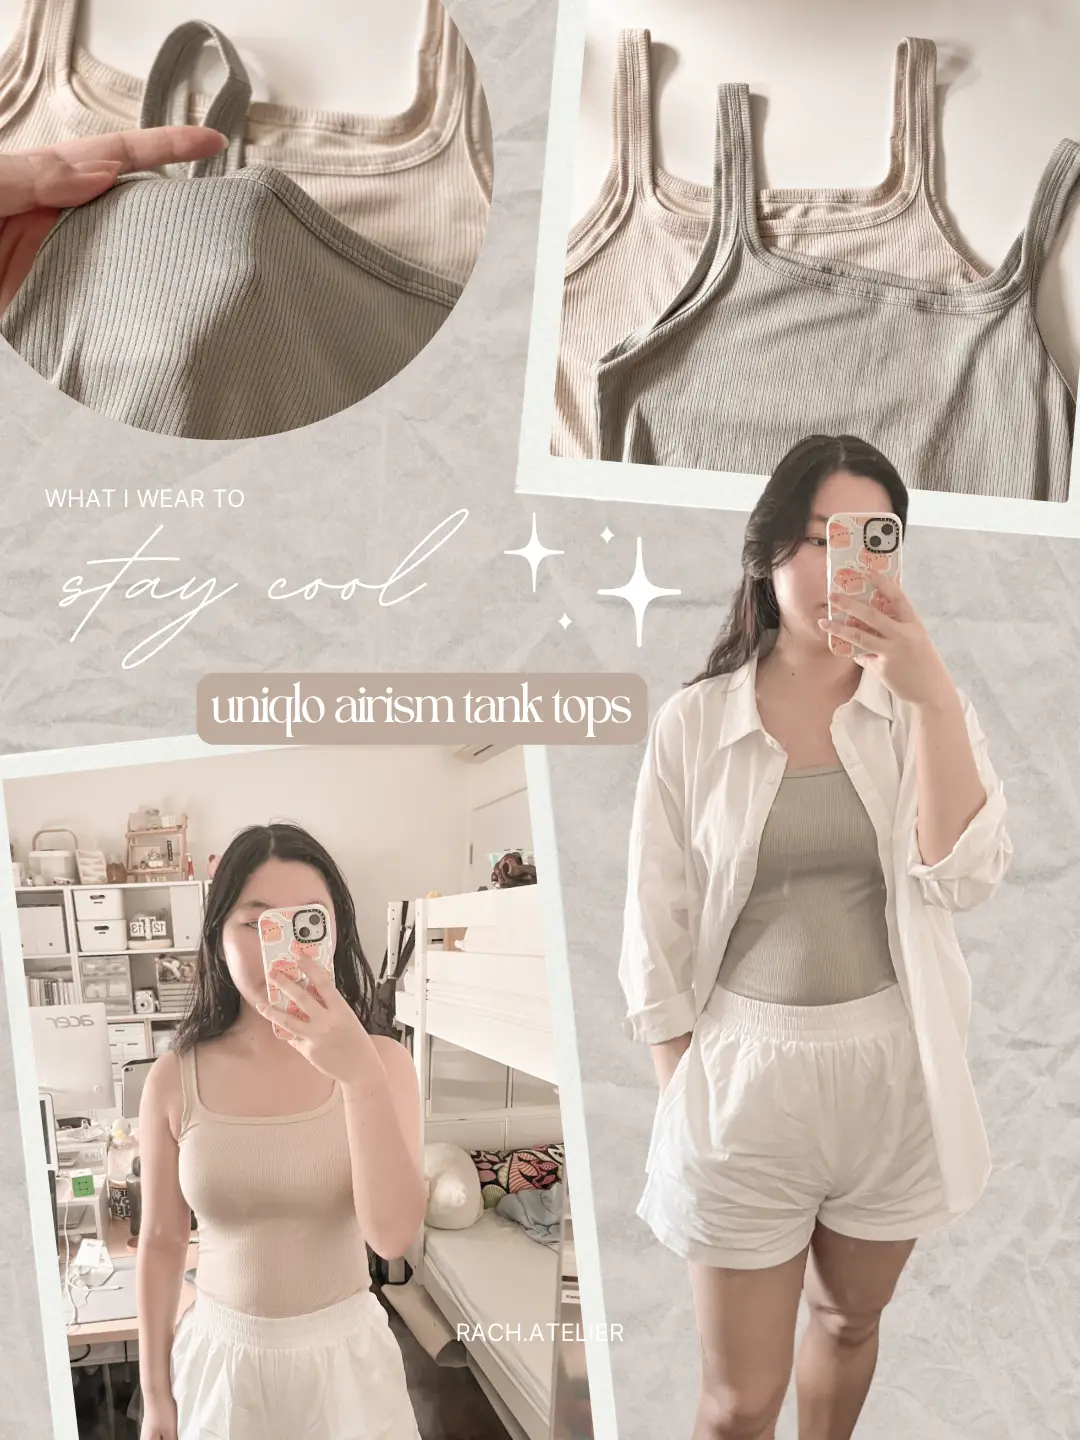 stay cool with these cute uniqlo tanks 🤩, Gallery posted by rach 👽